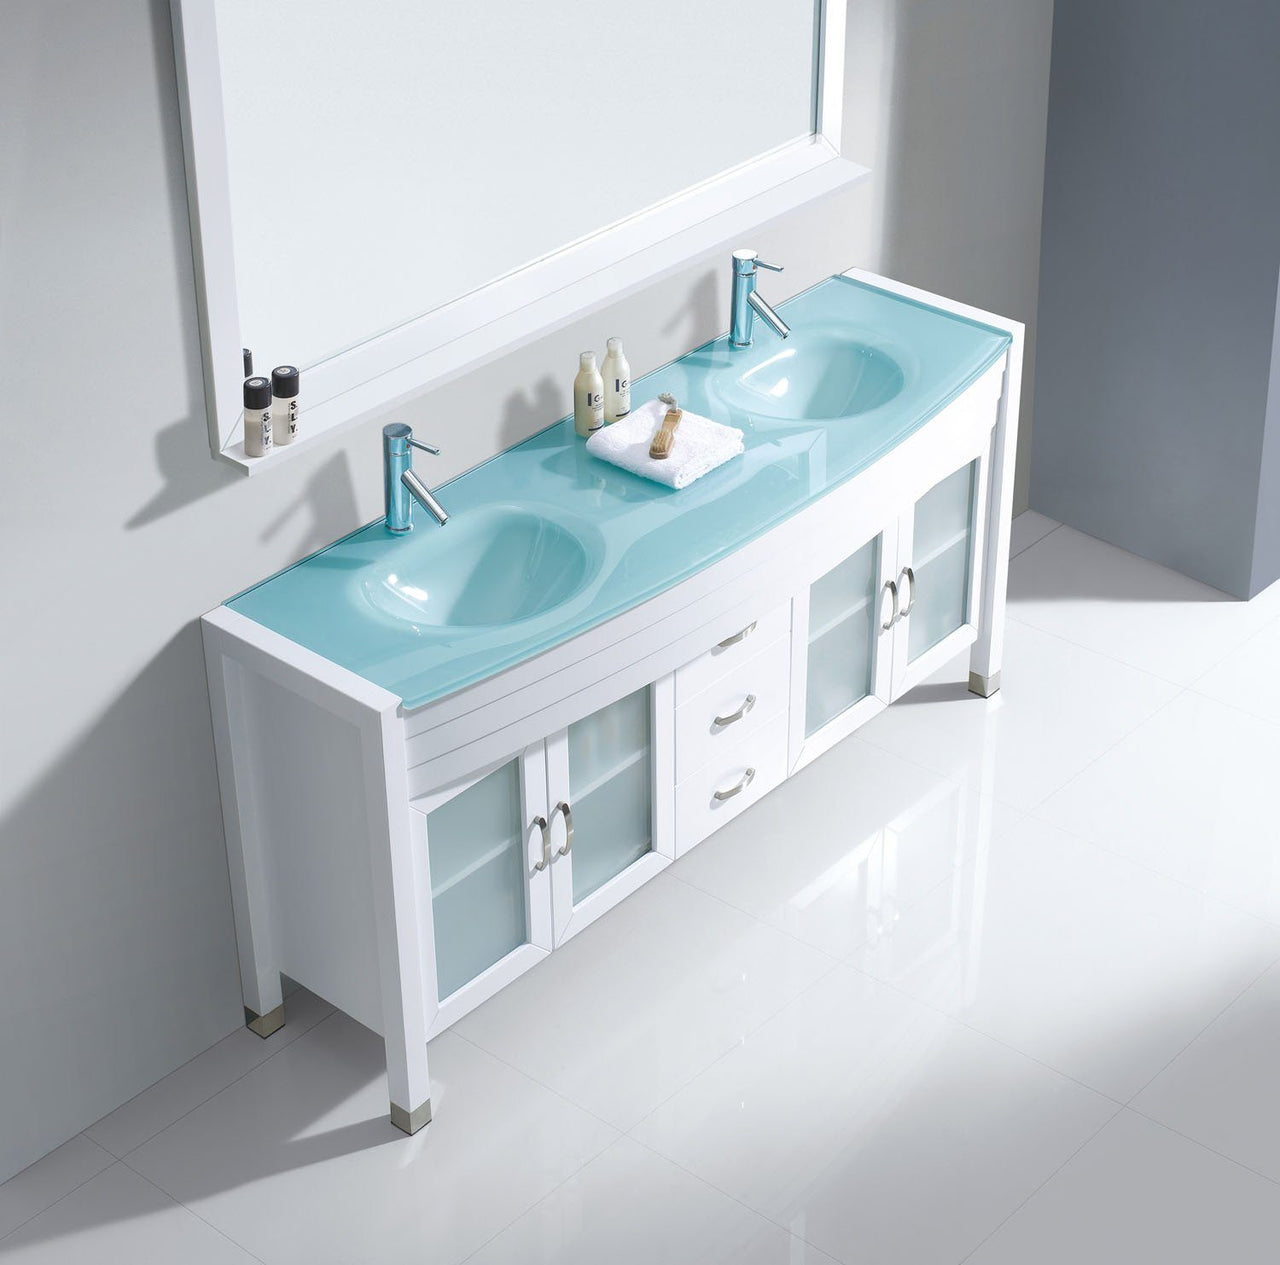 Virtu USA Ava 63" Double Round Sink White Top Vanity in White with Brushed Nickel Faucet and Mirror Vanity Virtu USA 